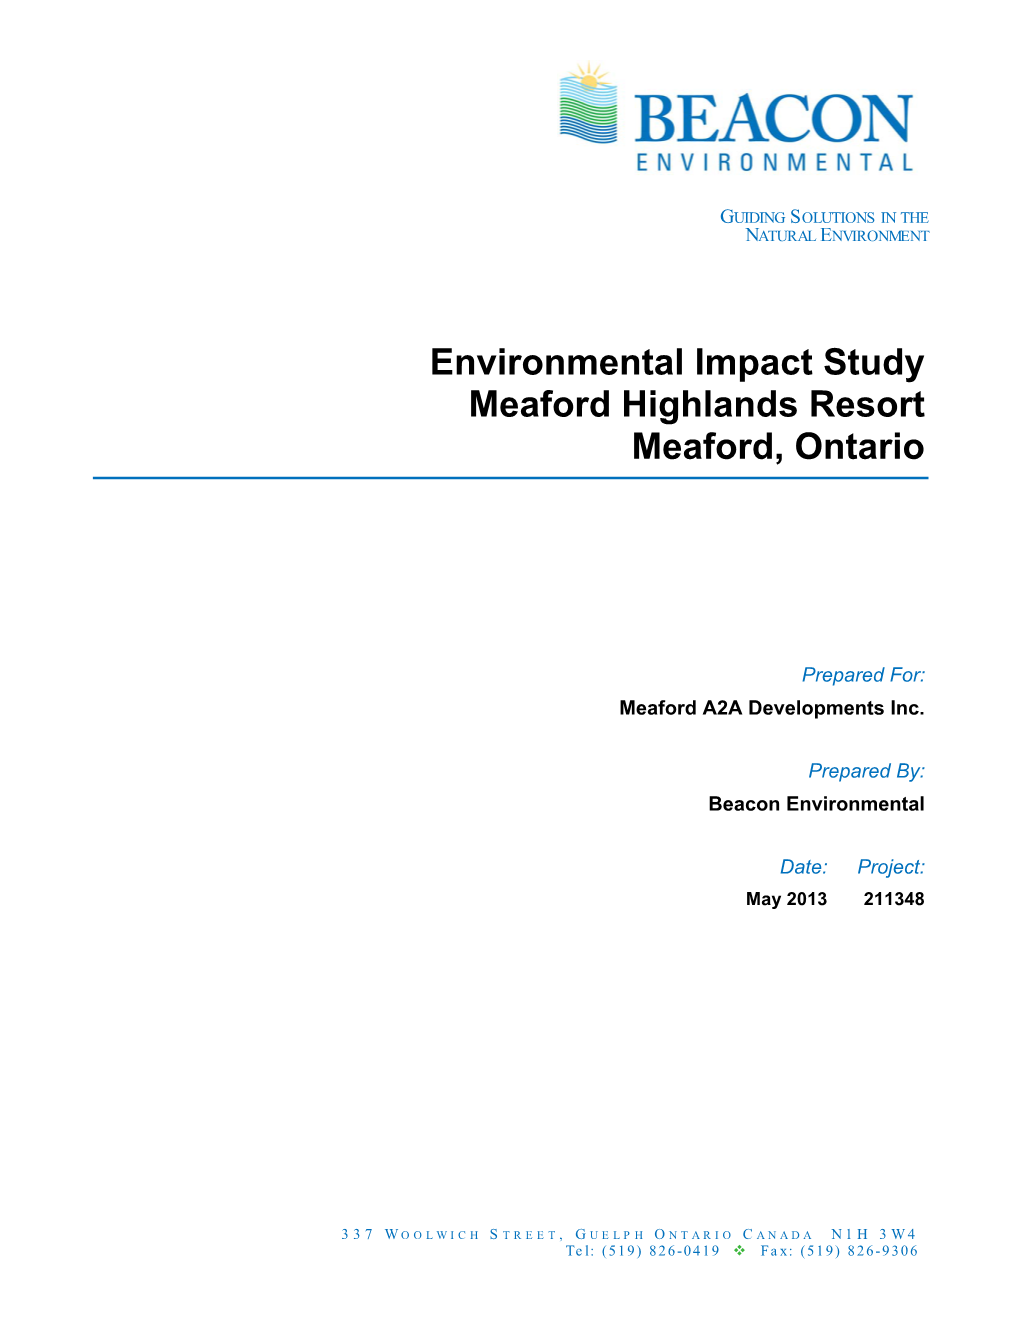 Environmental Impact Study Meaford Highlands Resort Meaford, Ontario